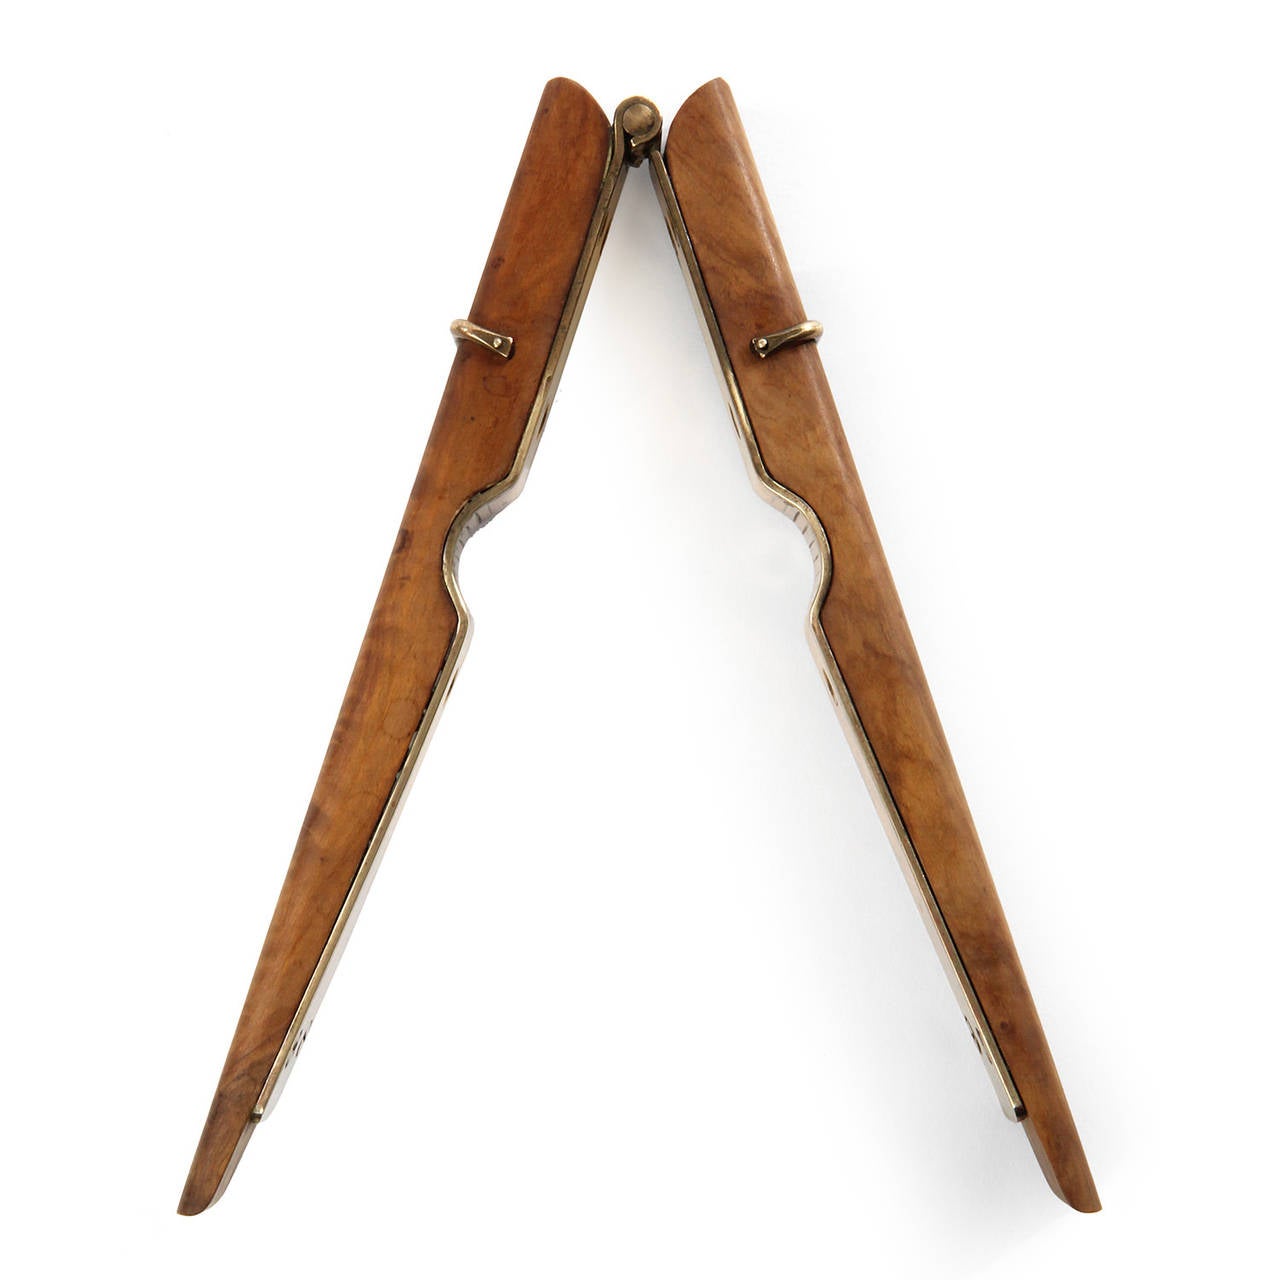 An expressive and finely rendered nut cracker in bronze and walnut having the form of an oversized clothes pin.